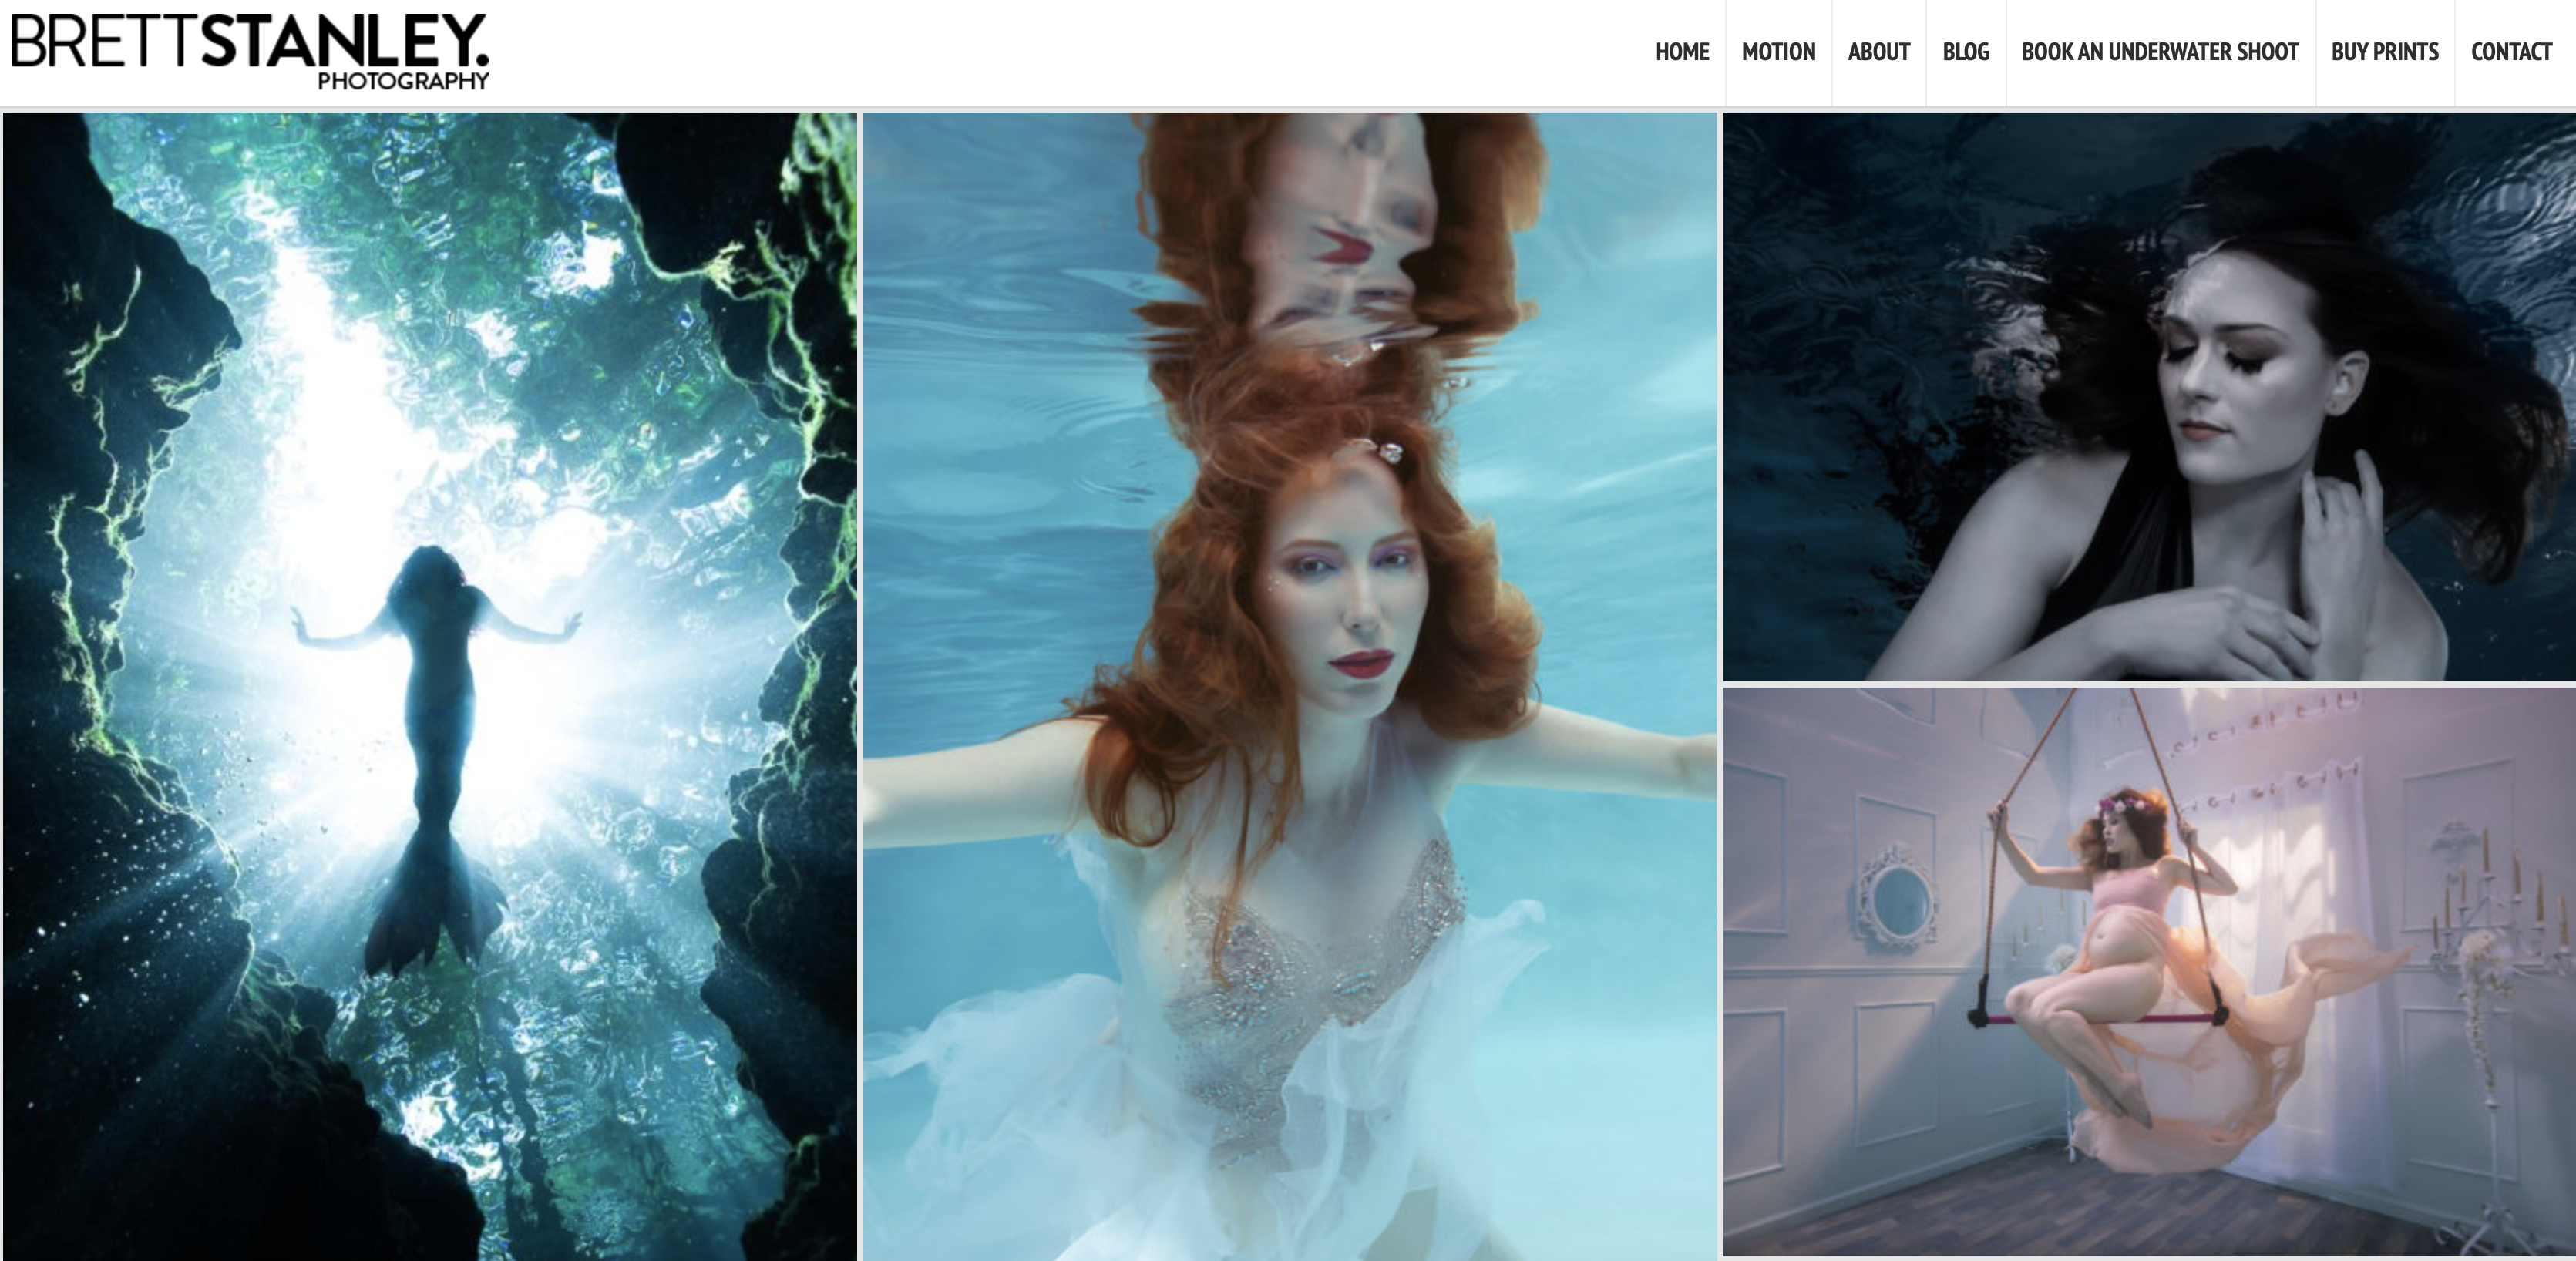 //www.theunderwaterwoman.com/wp-content/uploads/2020/01/Screen-Shot-2020-01-05-at-4.35.05-PM.png